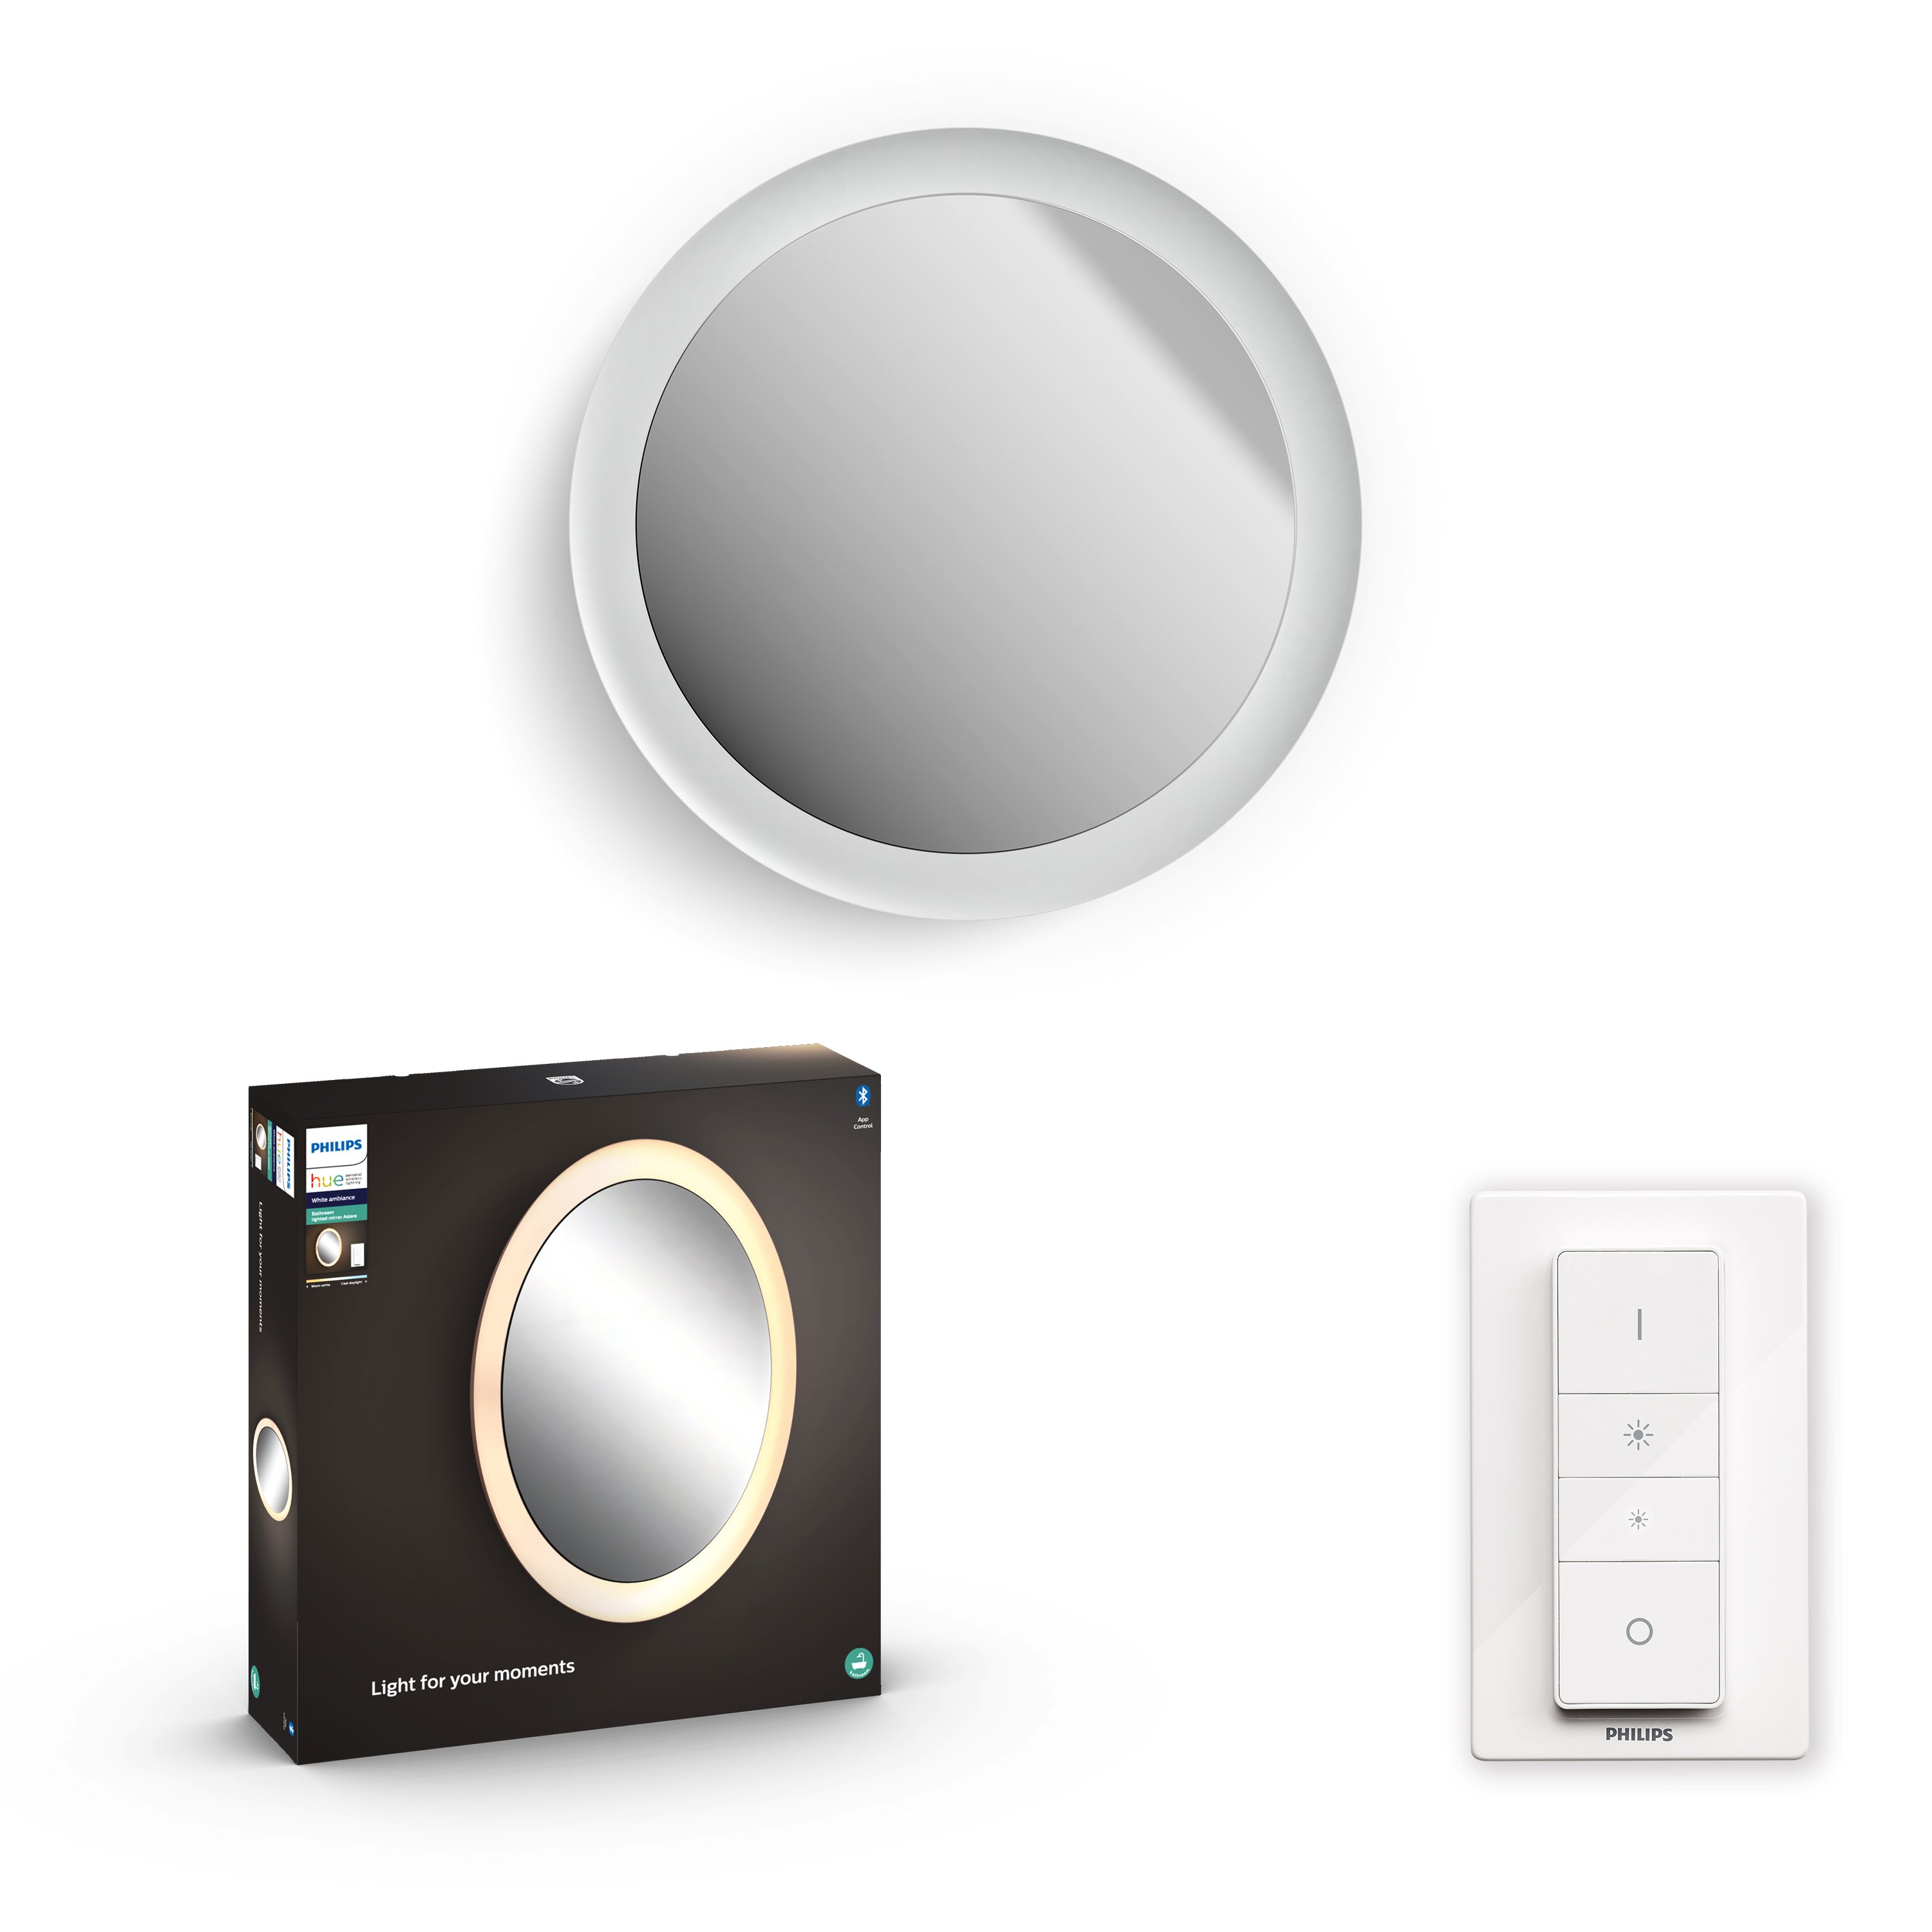 Philips Hue - Adore Hue wall lamp white 1x40W 24V - White Ambiance - Bluetooth Included dimmer switch